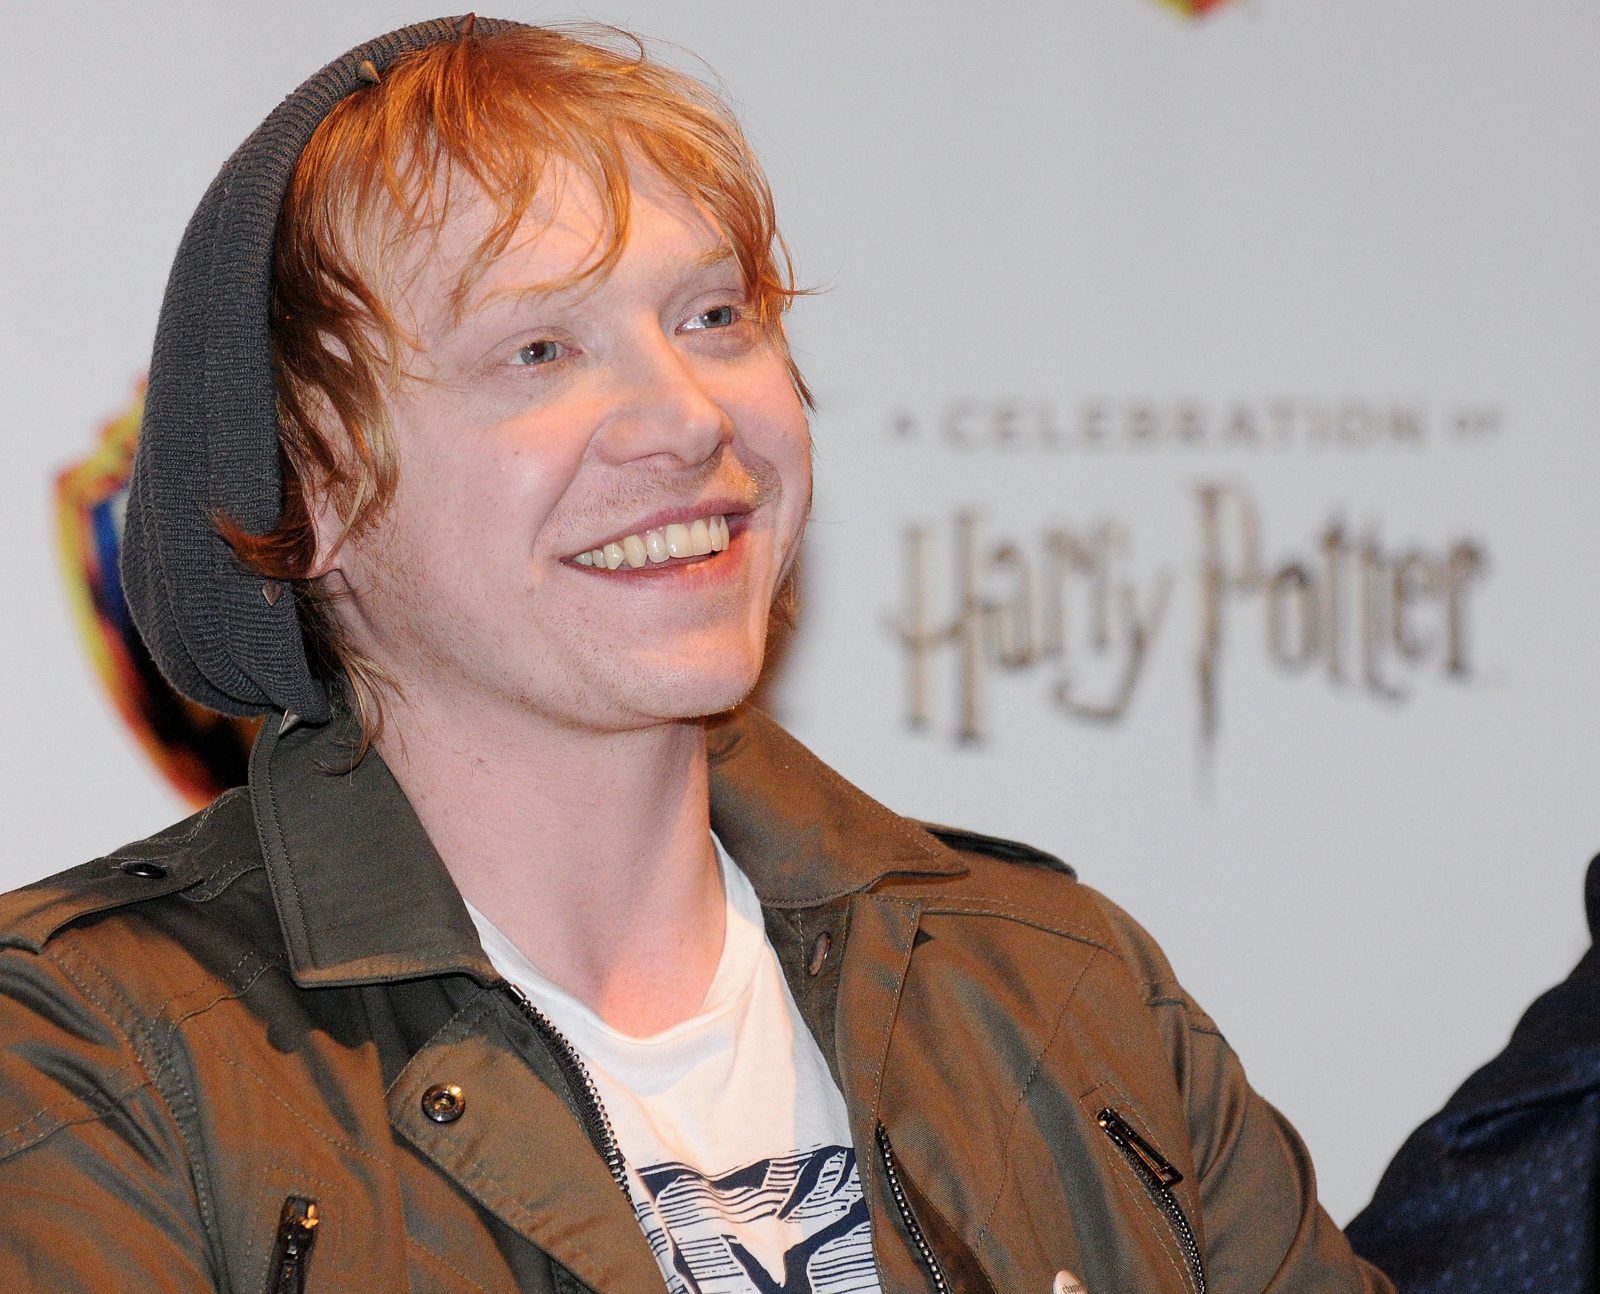 Harry Potters Rupert Grint And Fear The Walking Deads Dou